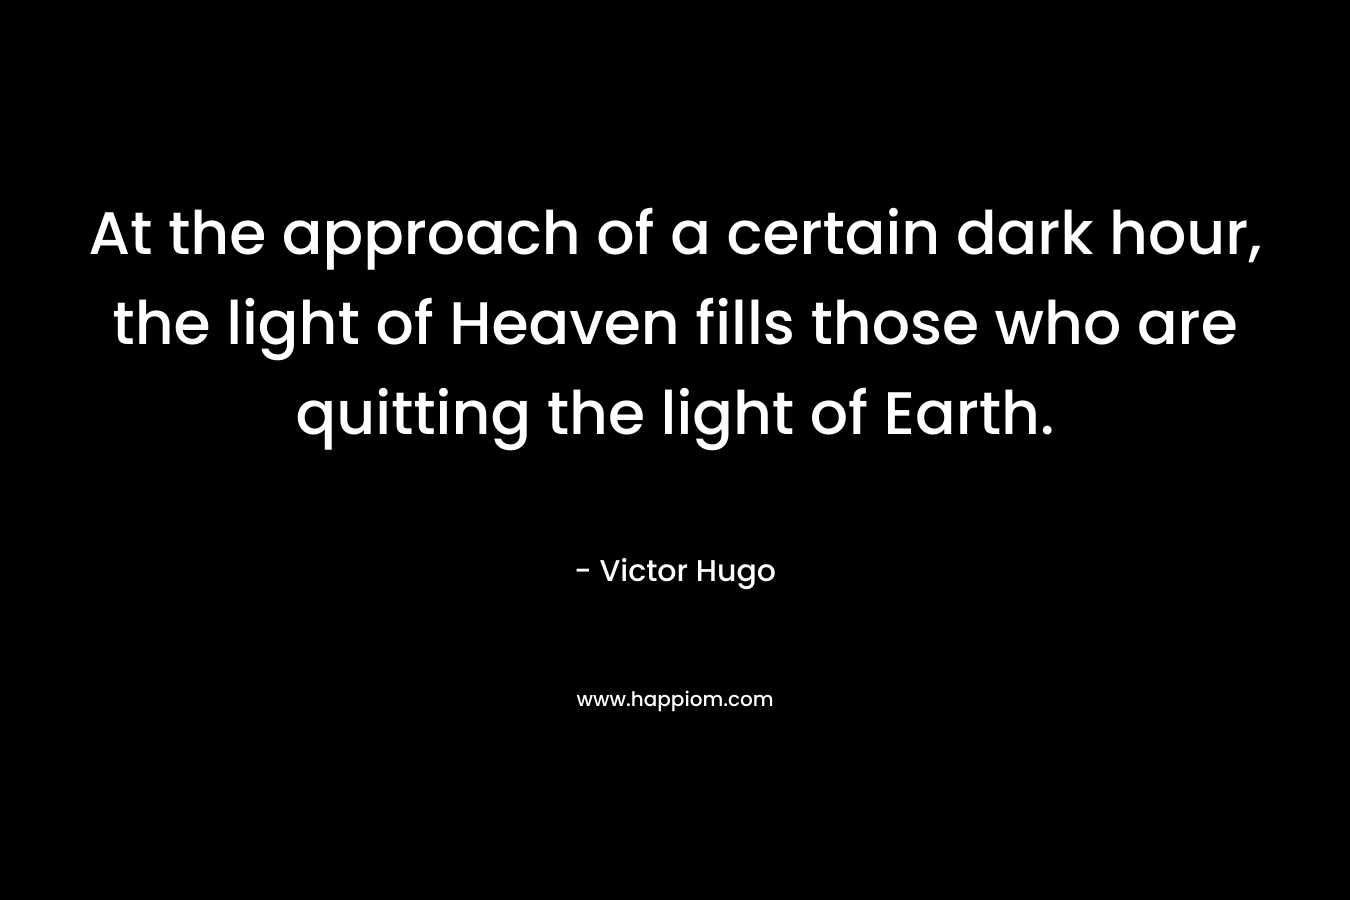 At the approach of a certain dark hour, the light of Heaven fills those who are quitting the light of Earth. – Victor Hugo